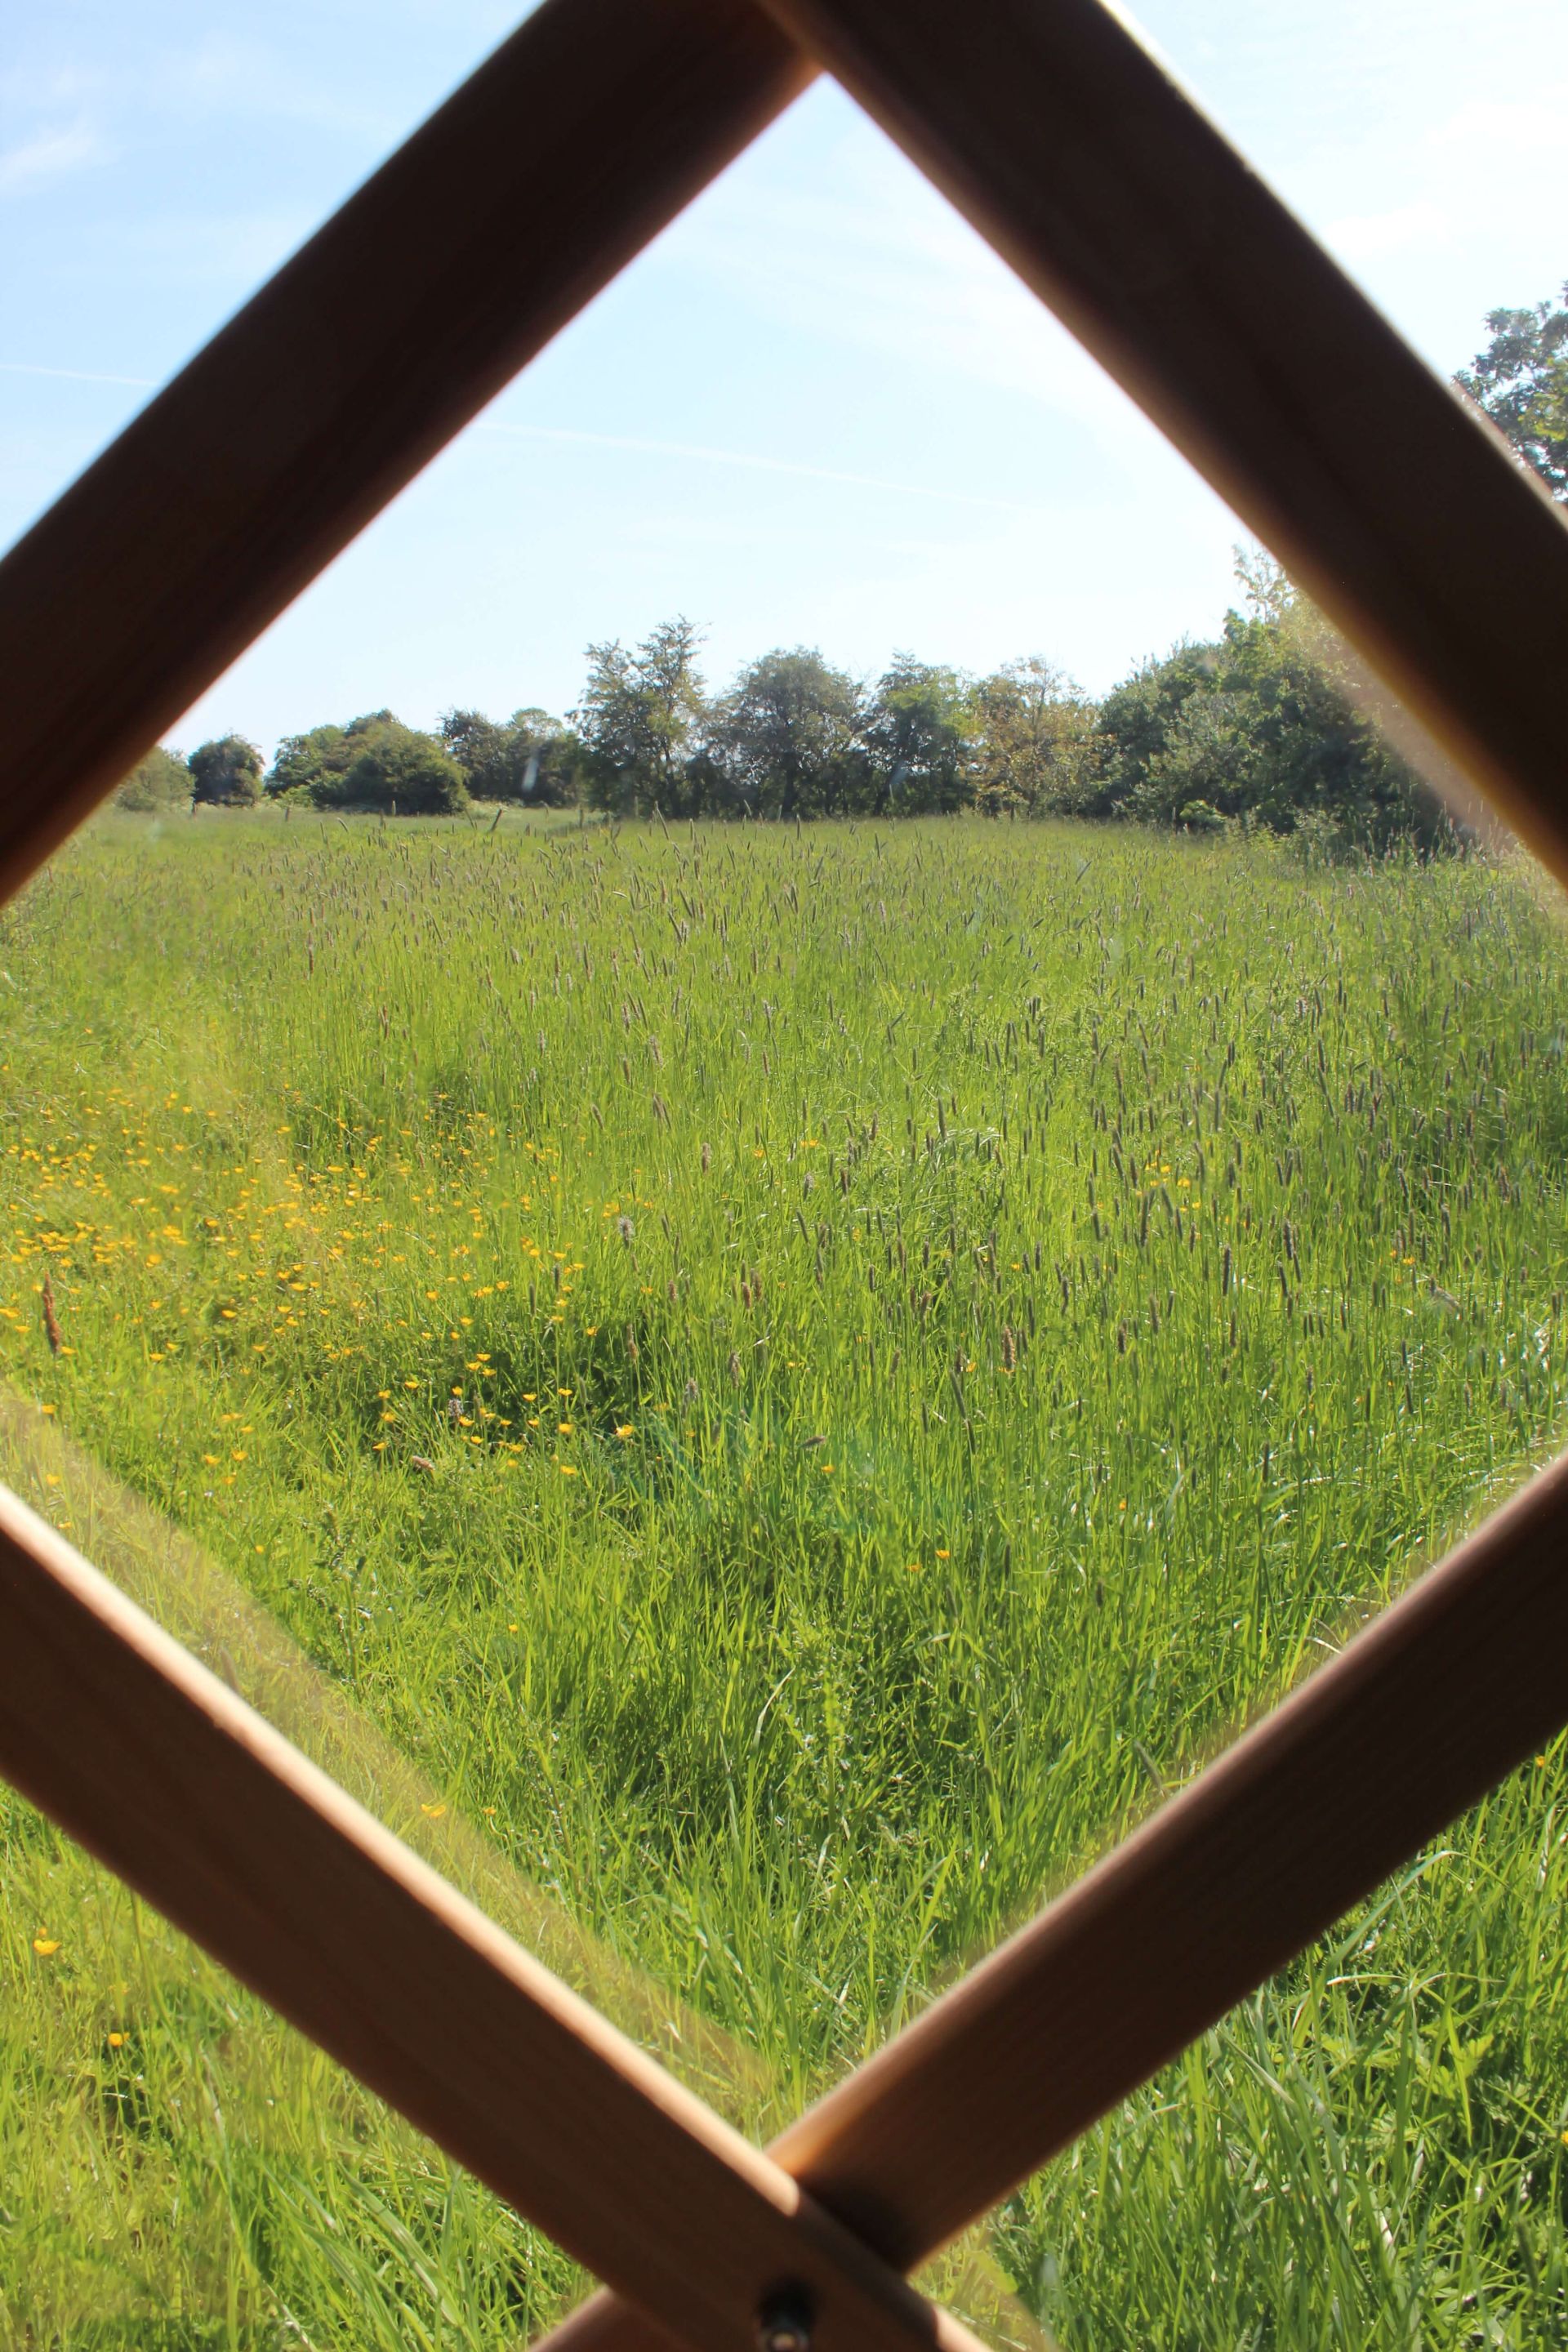 the view from inside a herbalism school yurt overlooking a field of grass, flowers and hedgerows